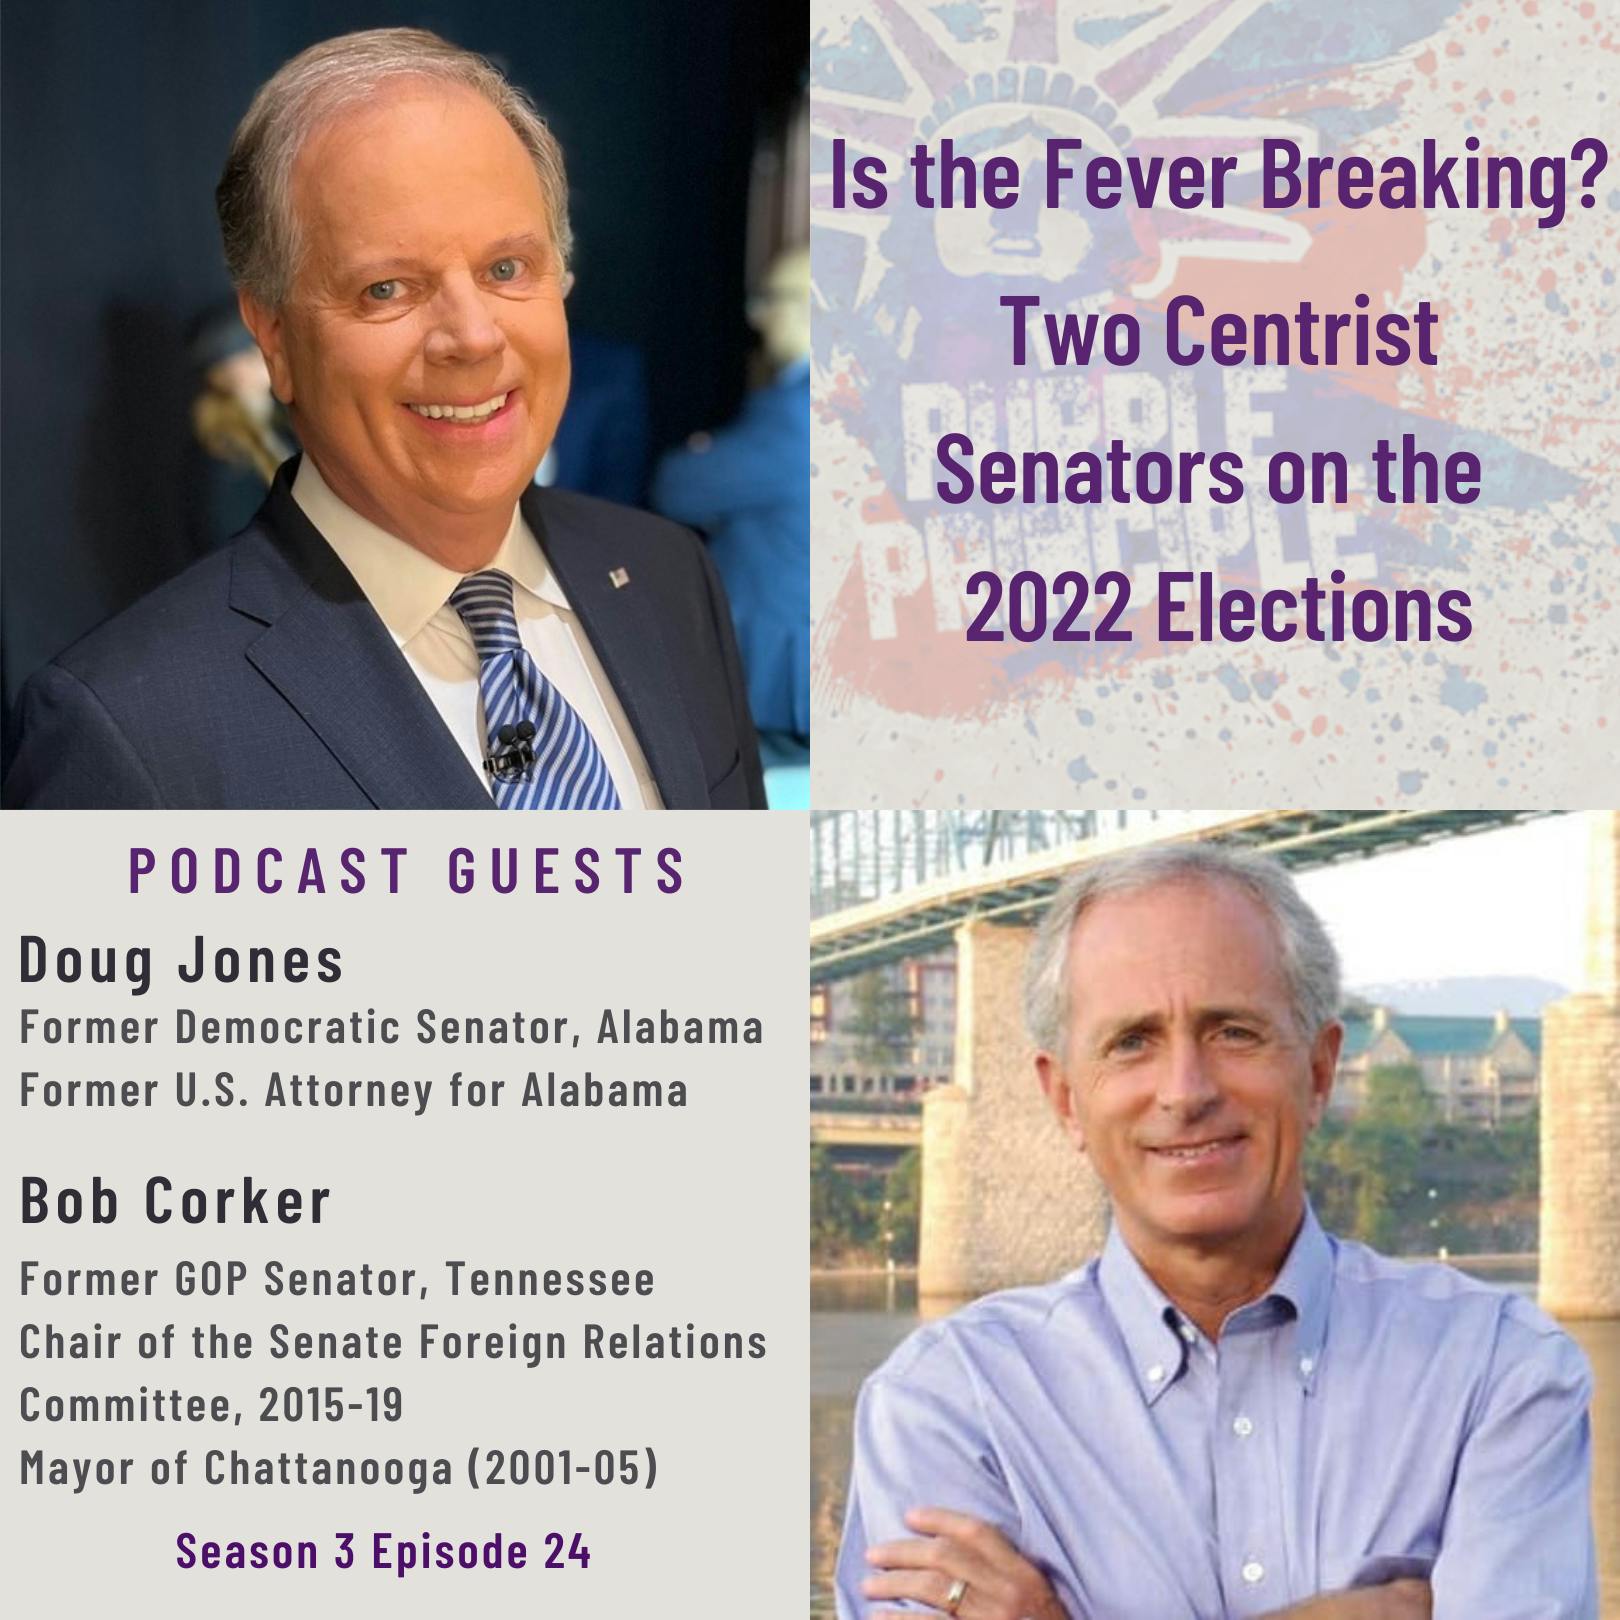 Is the Fever Breaking? Two Centrist Senators on the 2022 Elections